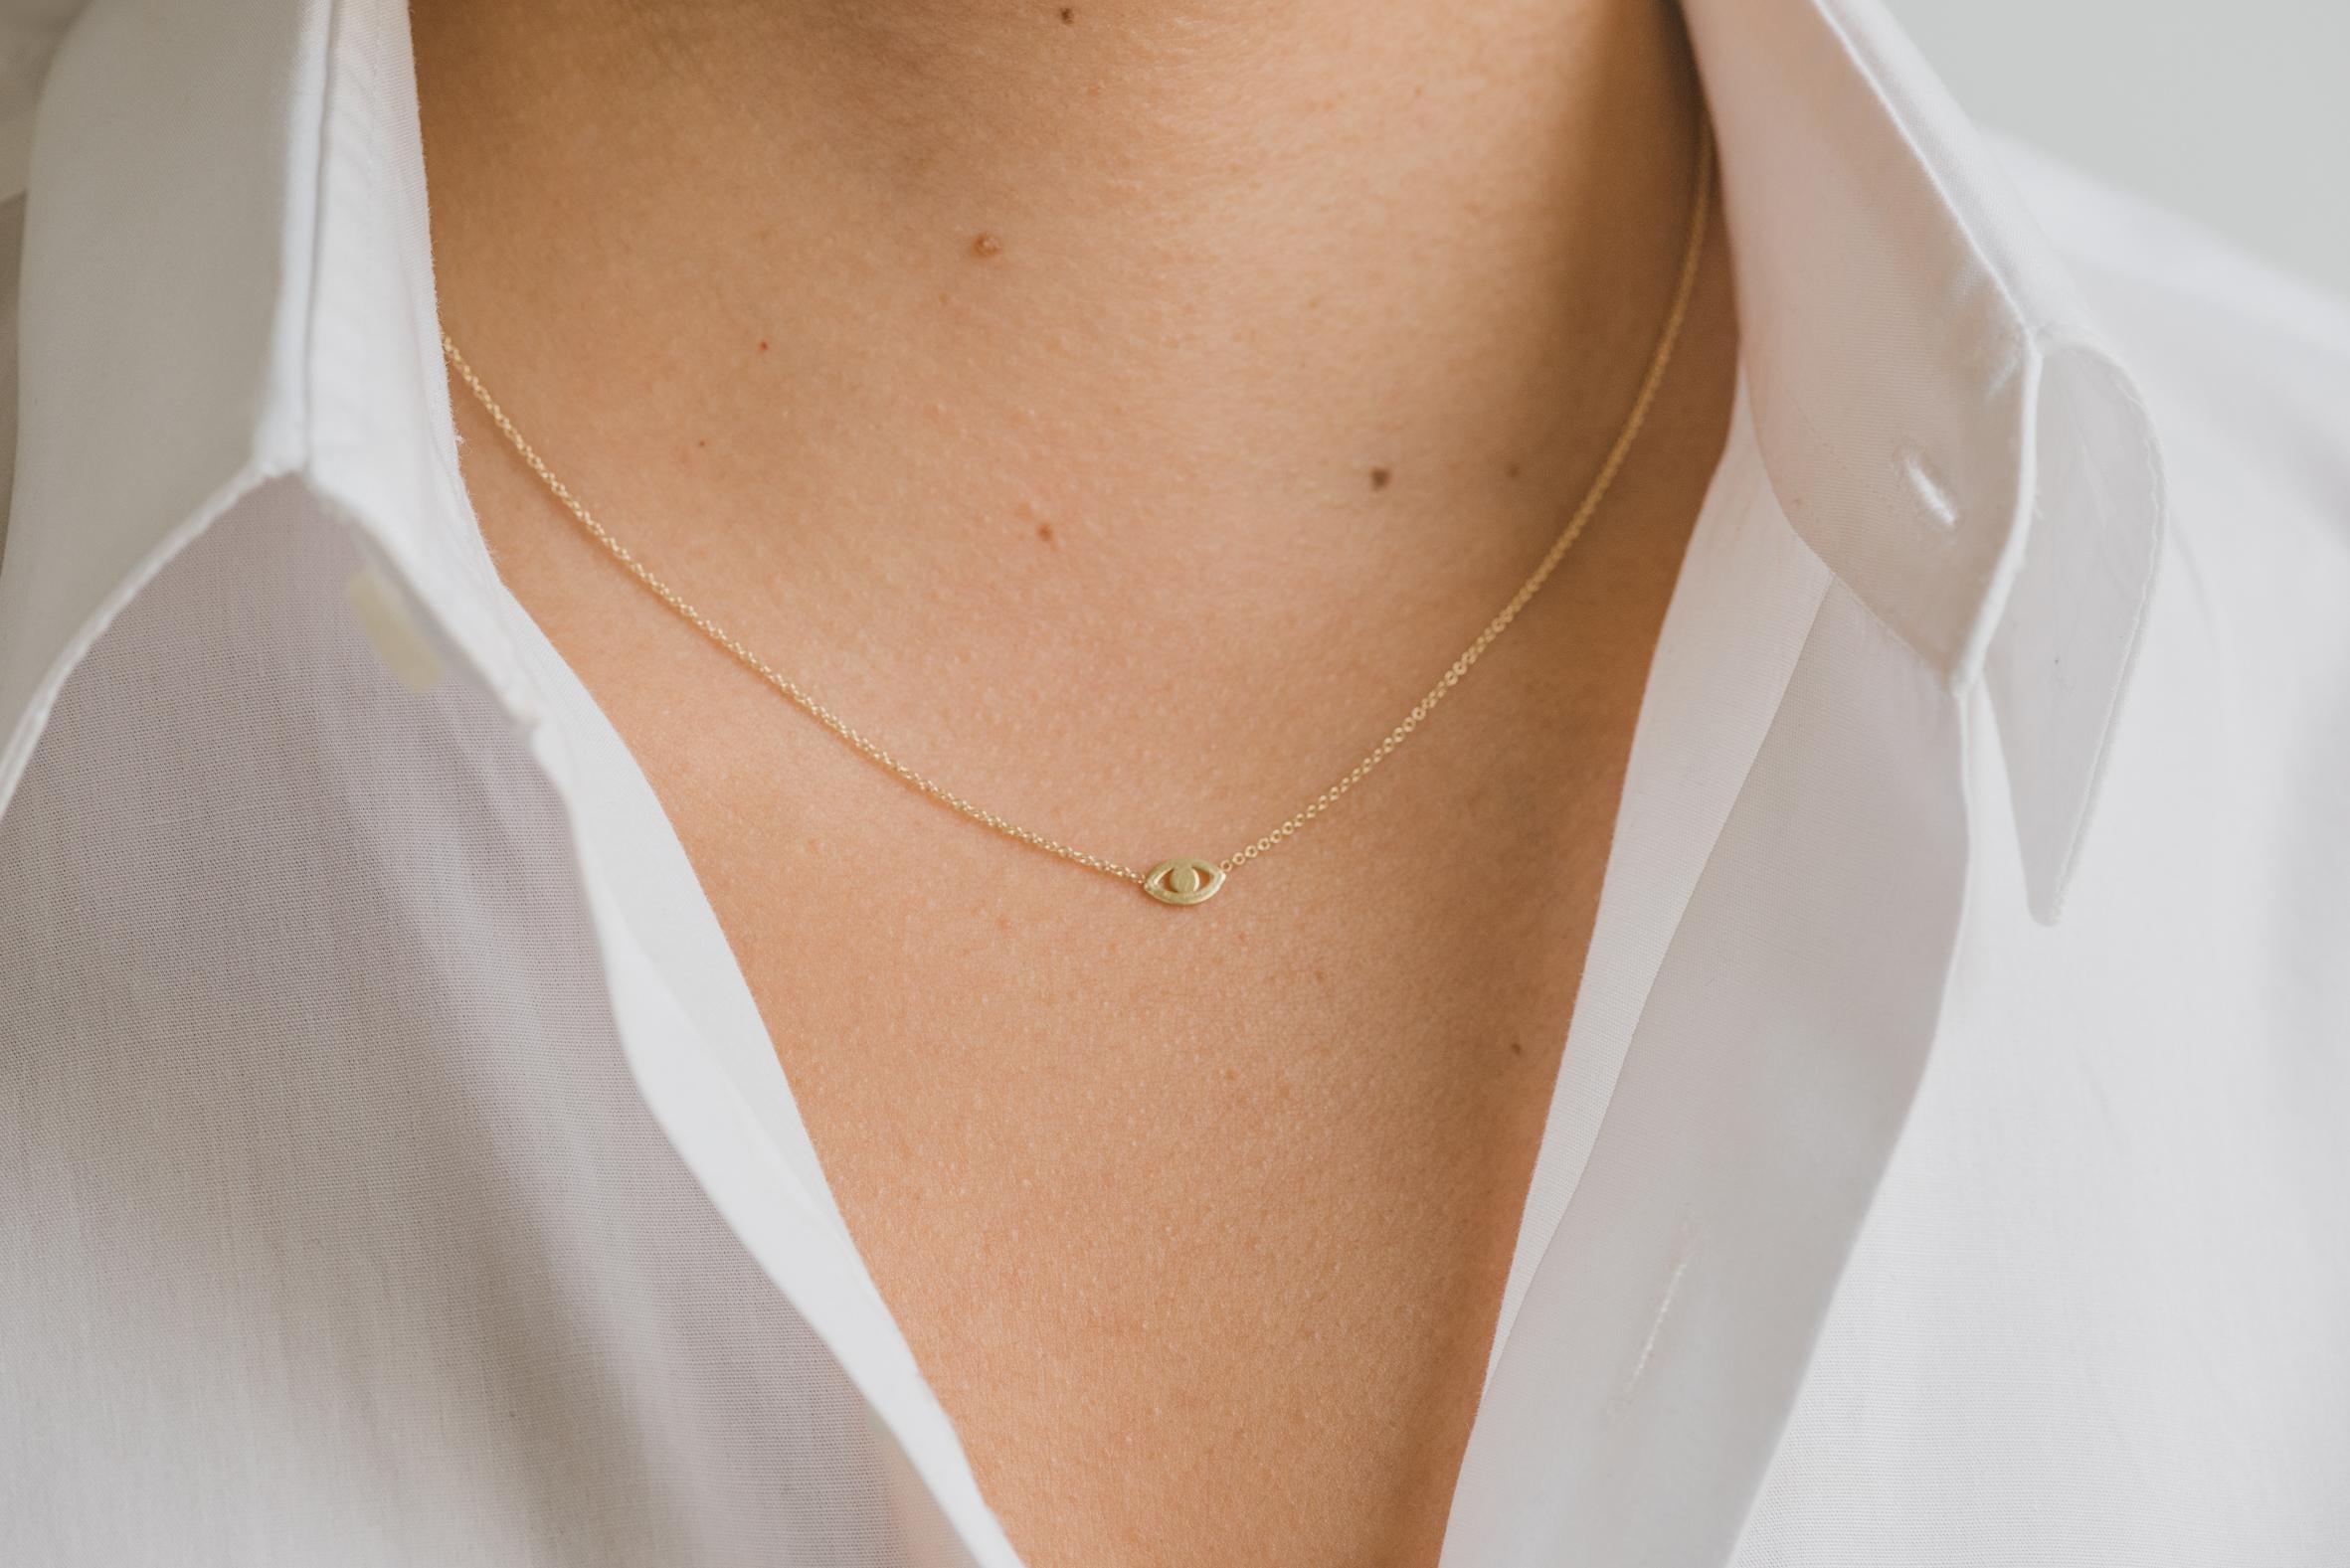 14k solid gold mini evil eye necklace, a dainty and classic must have! Effortlessly chic, perfect by itself or layered, available in 14k yellow gold, with a 16''-18'' adjustable chain.

Size: Approx. 6mm by 4mm
Weight : Approx. 1.1 Grams

Comes gift